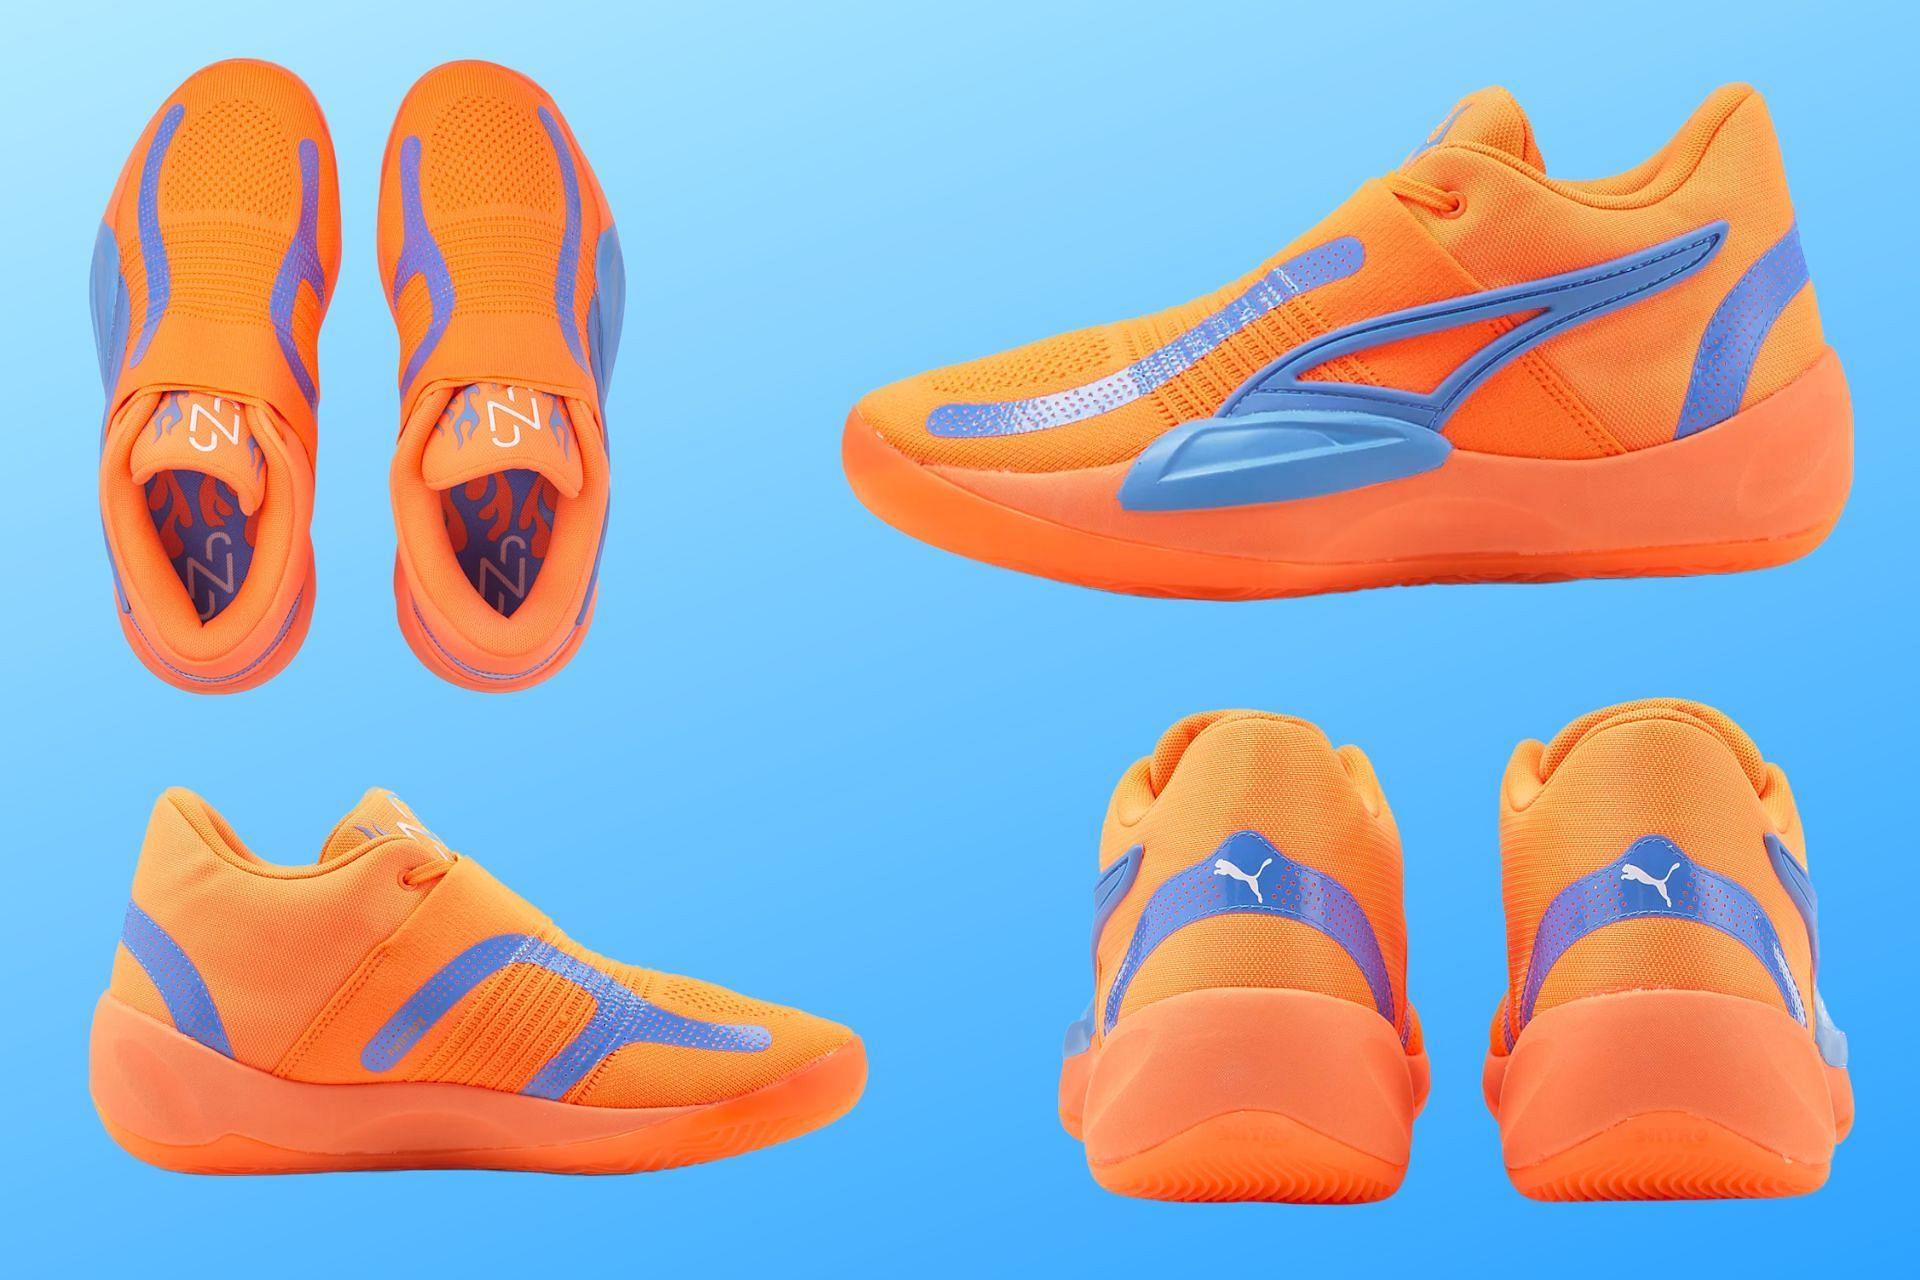 Take a closer look at the upcoming Basketball sneakers (Image via Sportskeeda)